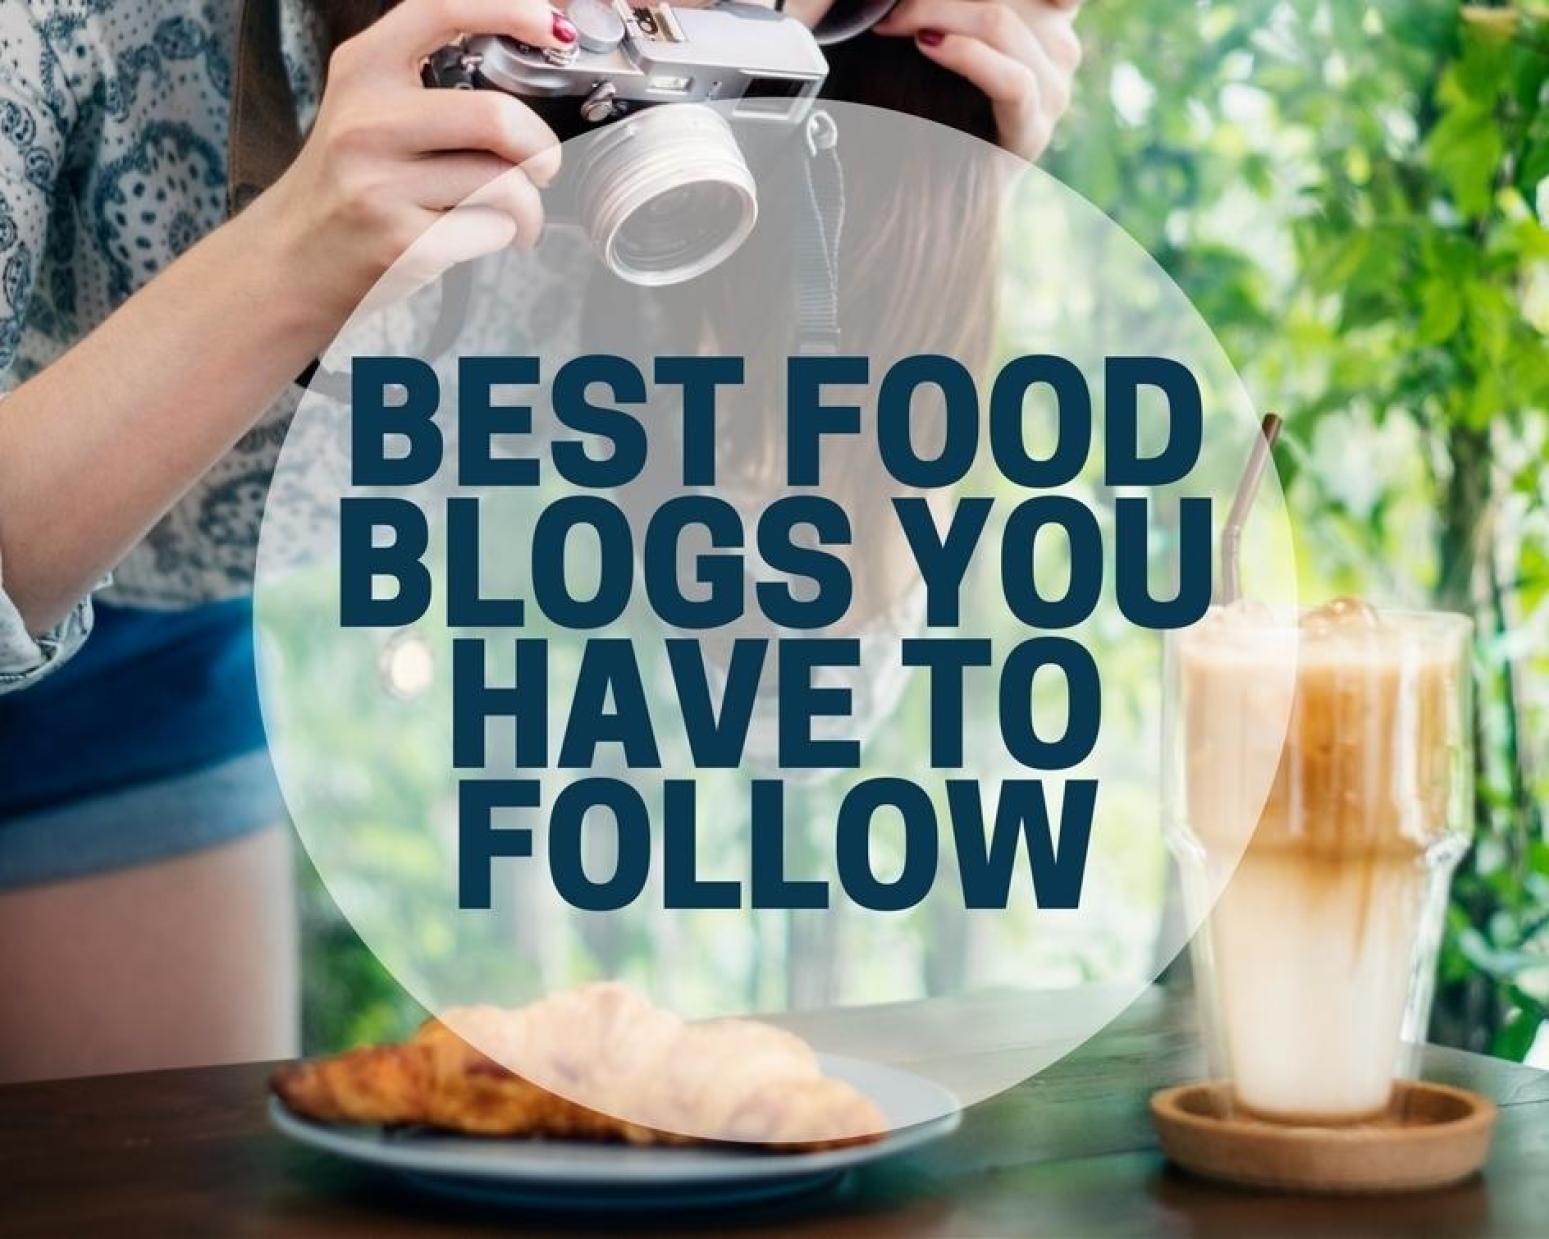 https://www.justapinch.com/blog/wp-content/uploads/2016/10/best-food-blogs-you-have-to-follow.jpg